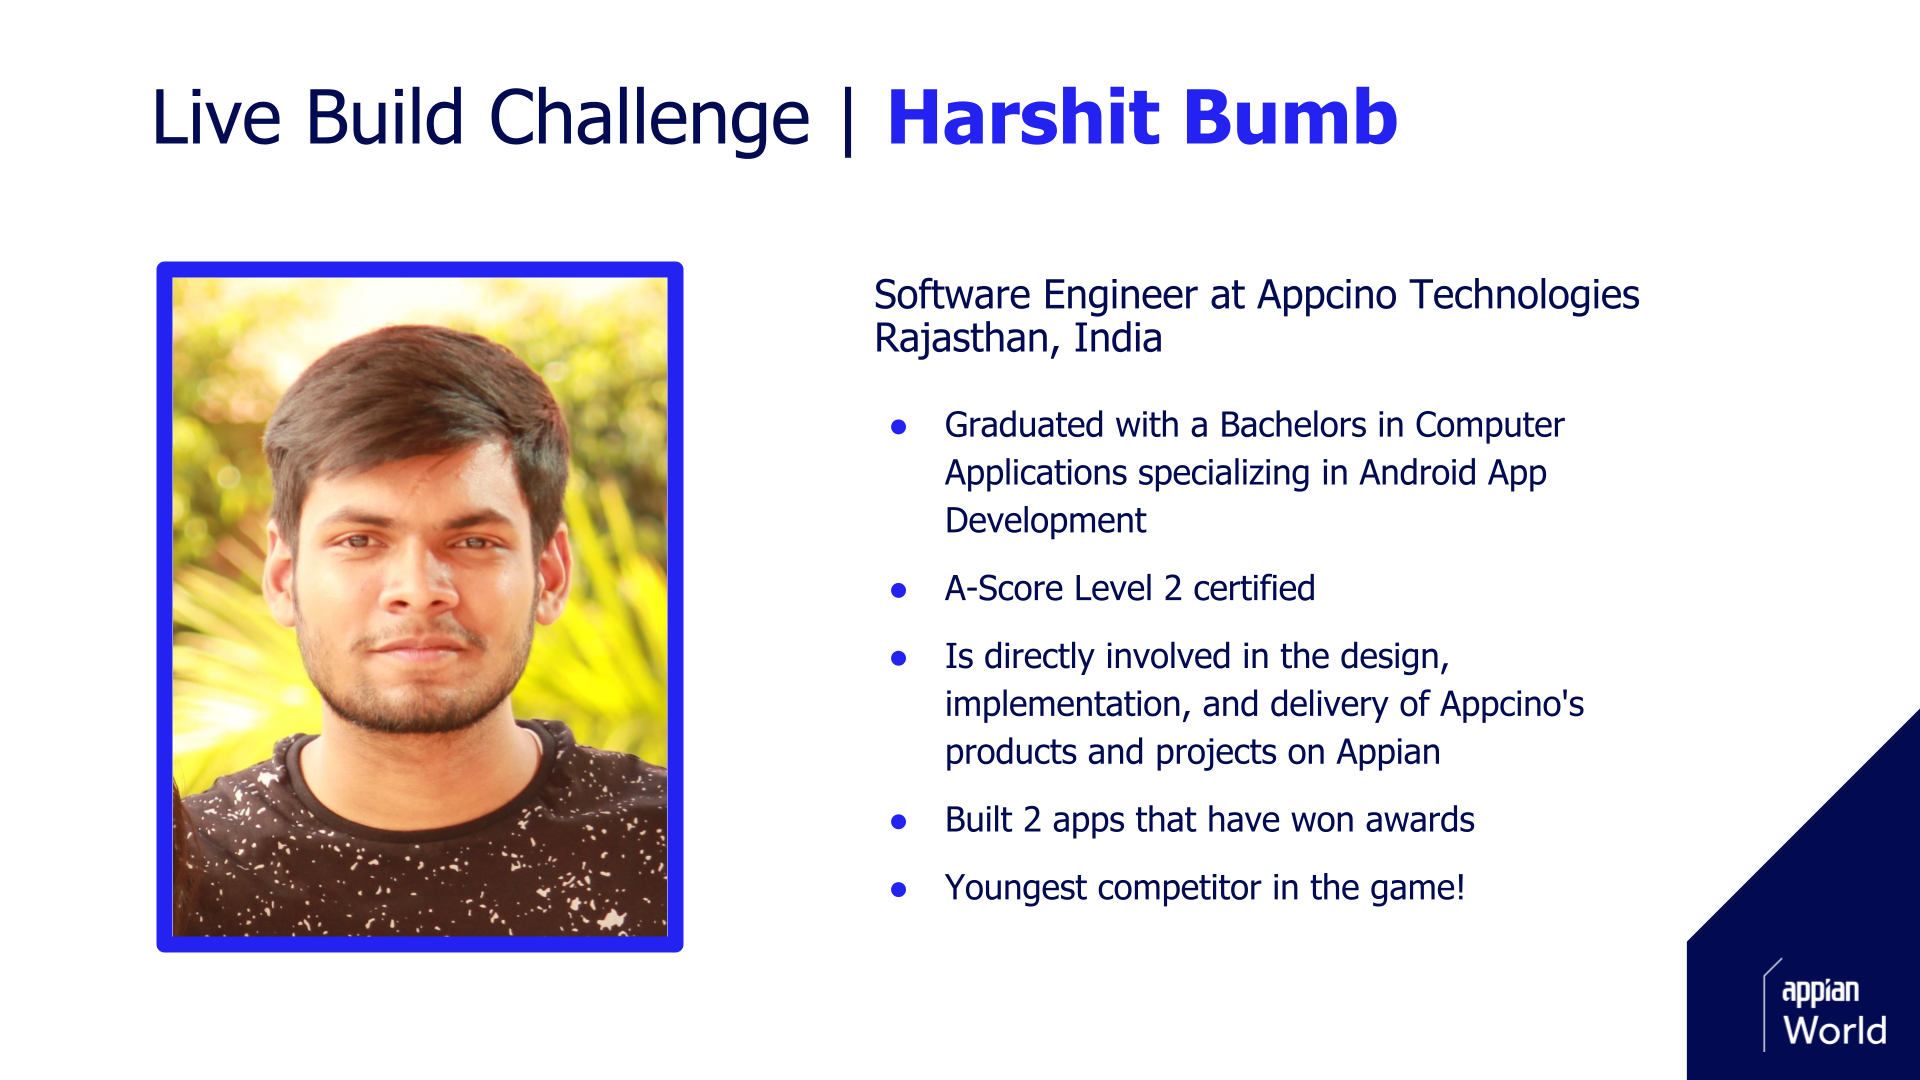 Harshit Bumb in Appian Live Build Challenge